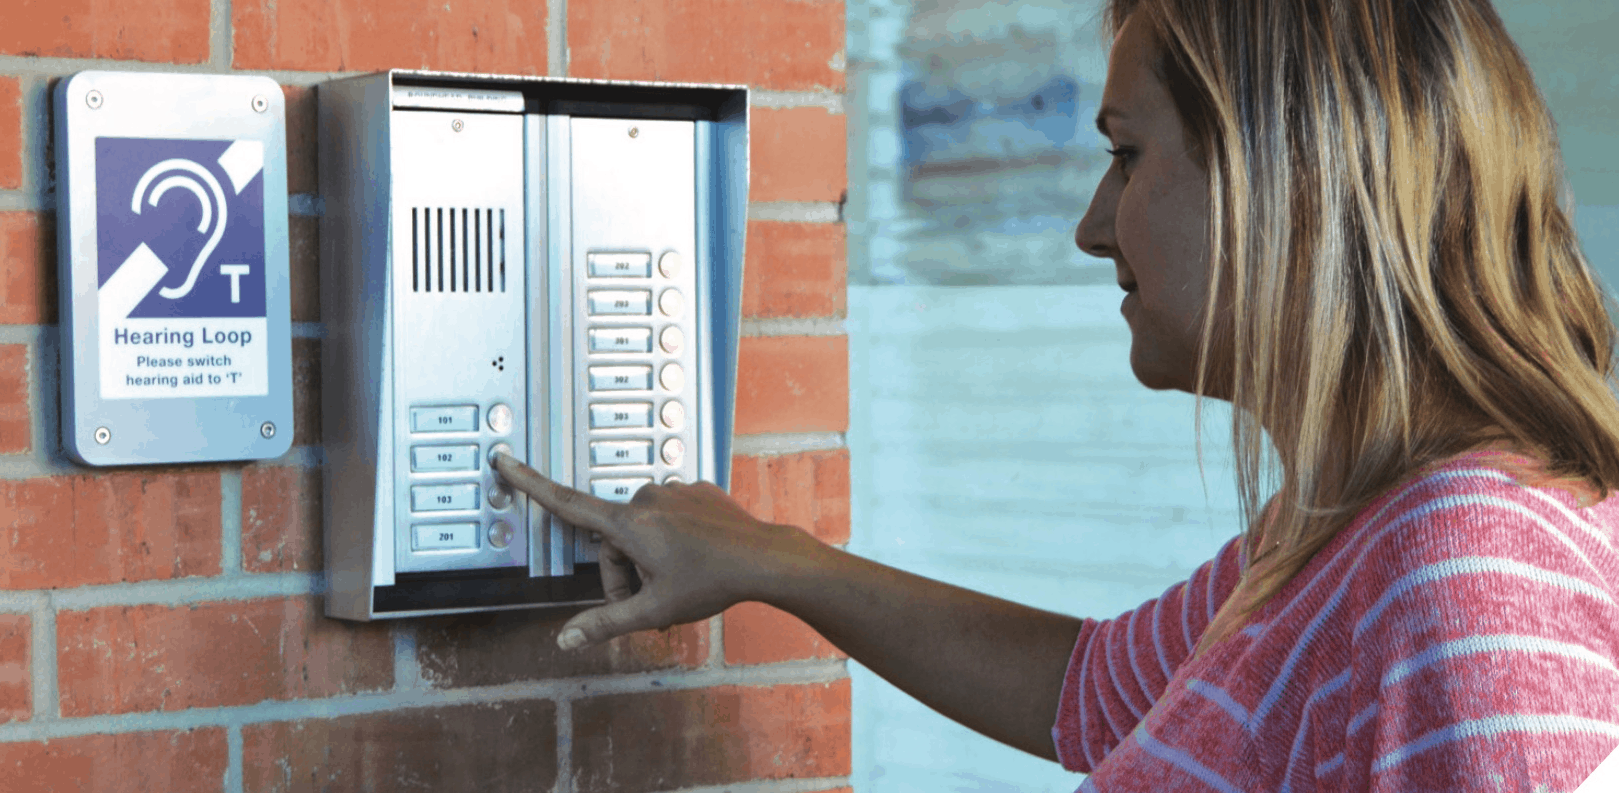 Young lady pressing a button on an Intercom Hearing Loop outside a building.